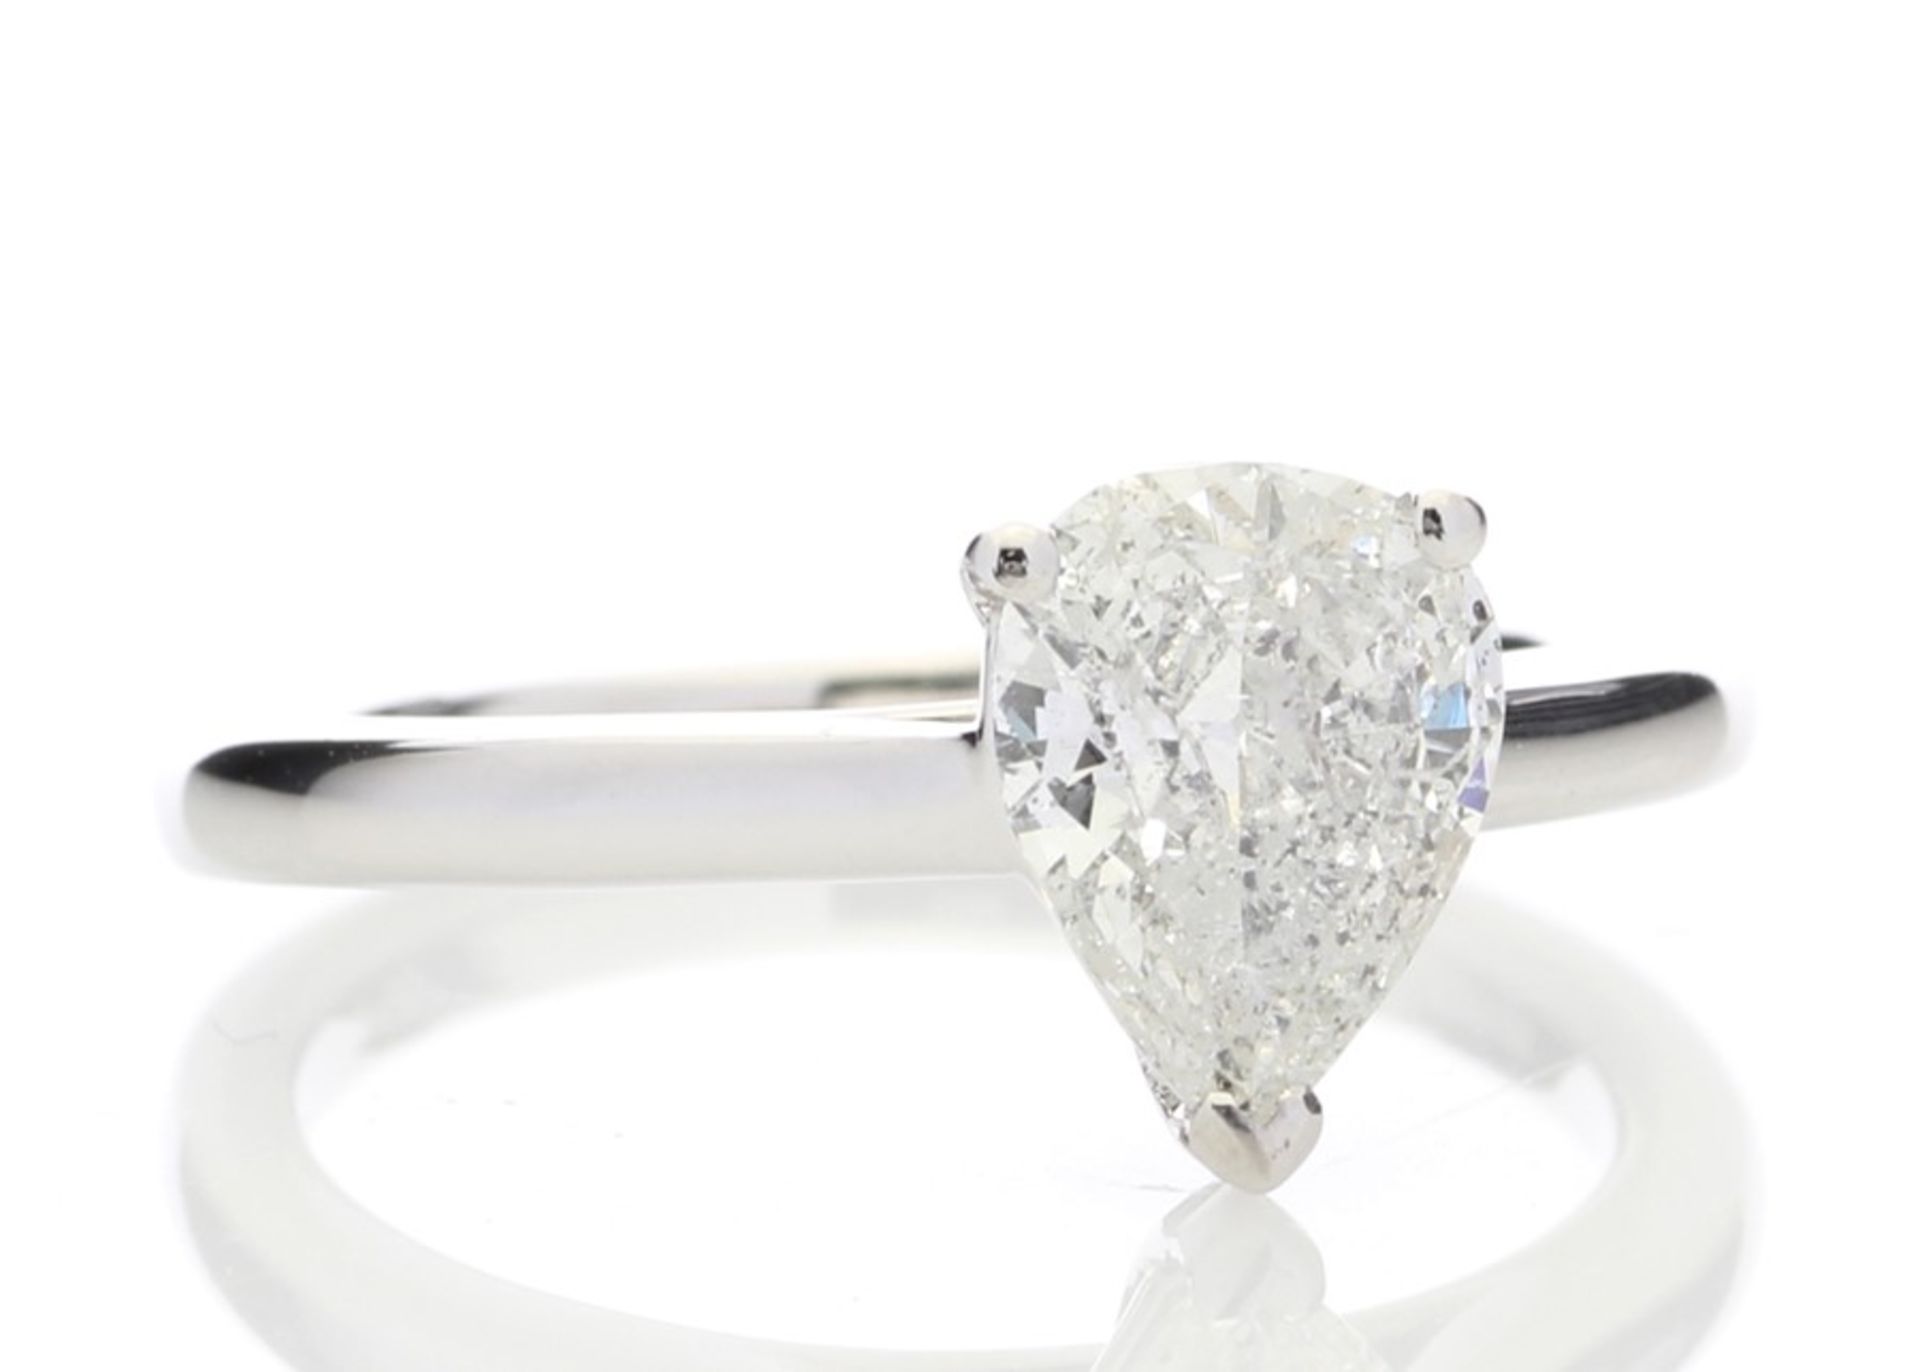 Valued by GIE £18,350.00 - 18ct White Gold Single Stone Pear Cut Diamond Ring 1.02 Carats - 3120006, - Image 4 of 5